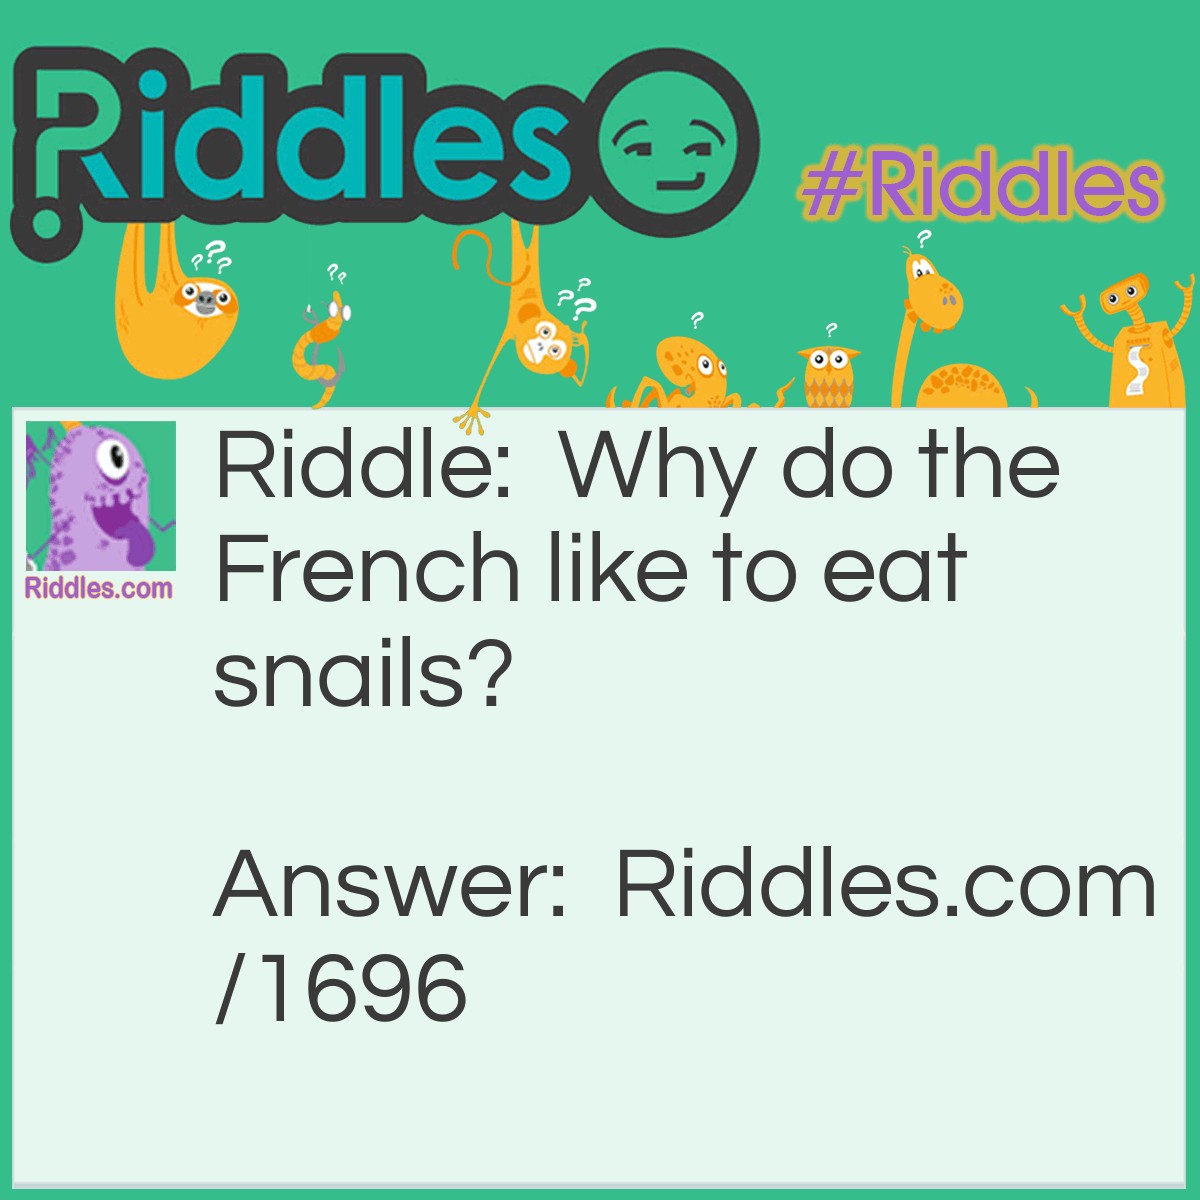 Riddle: Why do the French like to eat snails? Answer: Because they don't like fast food!